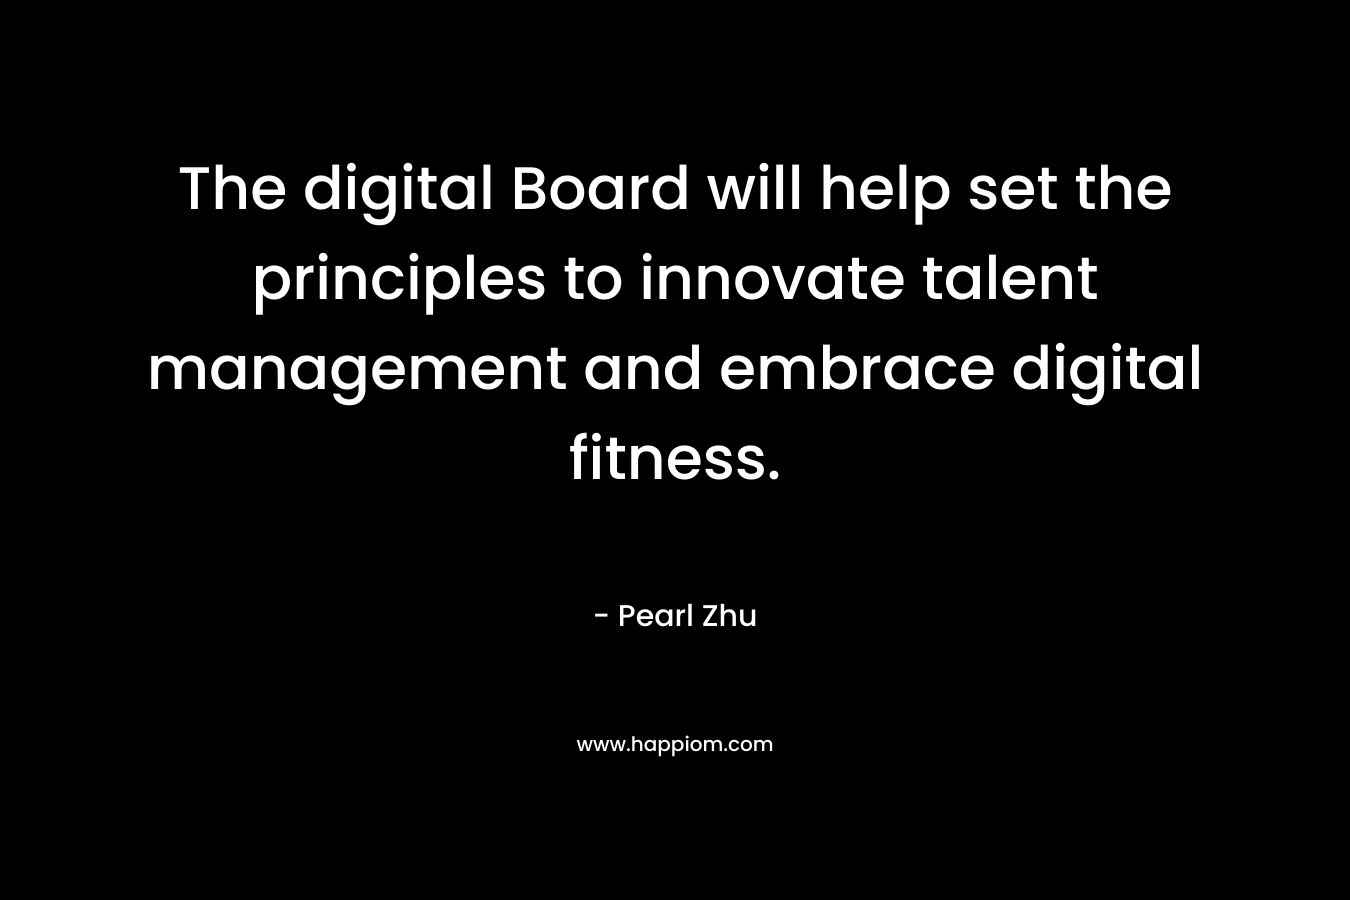 The digital Board will help set the principles to innovate talent management and embrace digital fitness. – Pearl Zhu